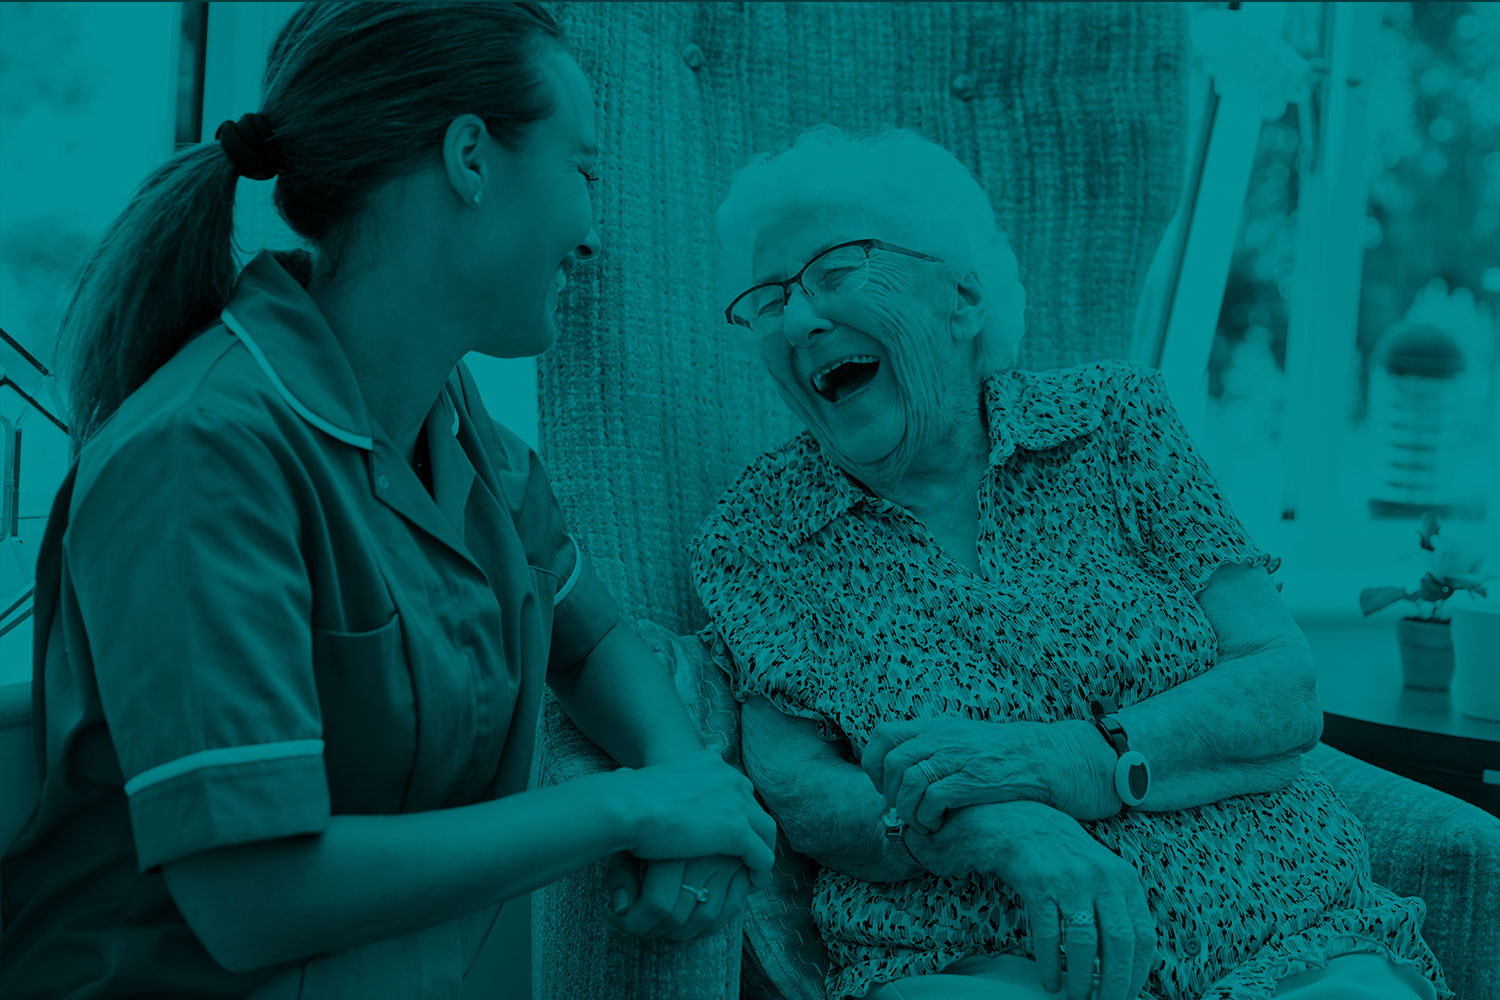 Nurse and elderly patient, laughing together